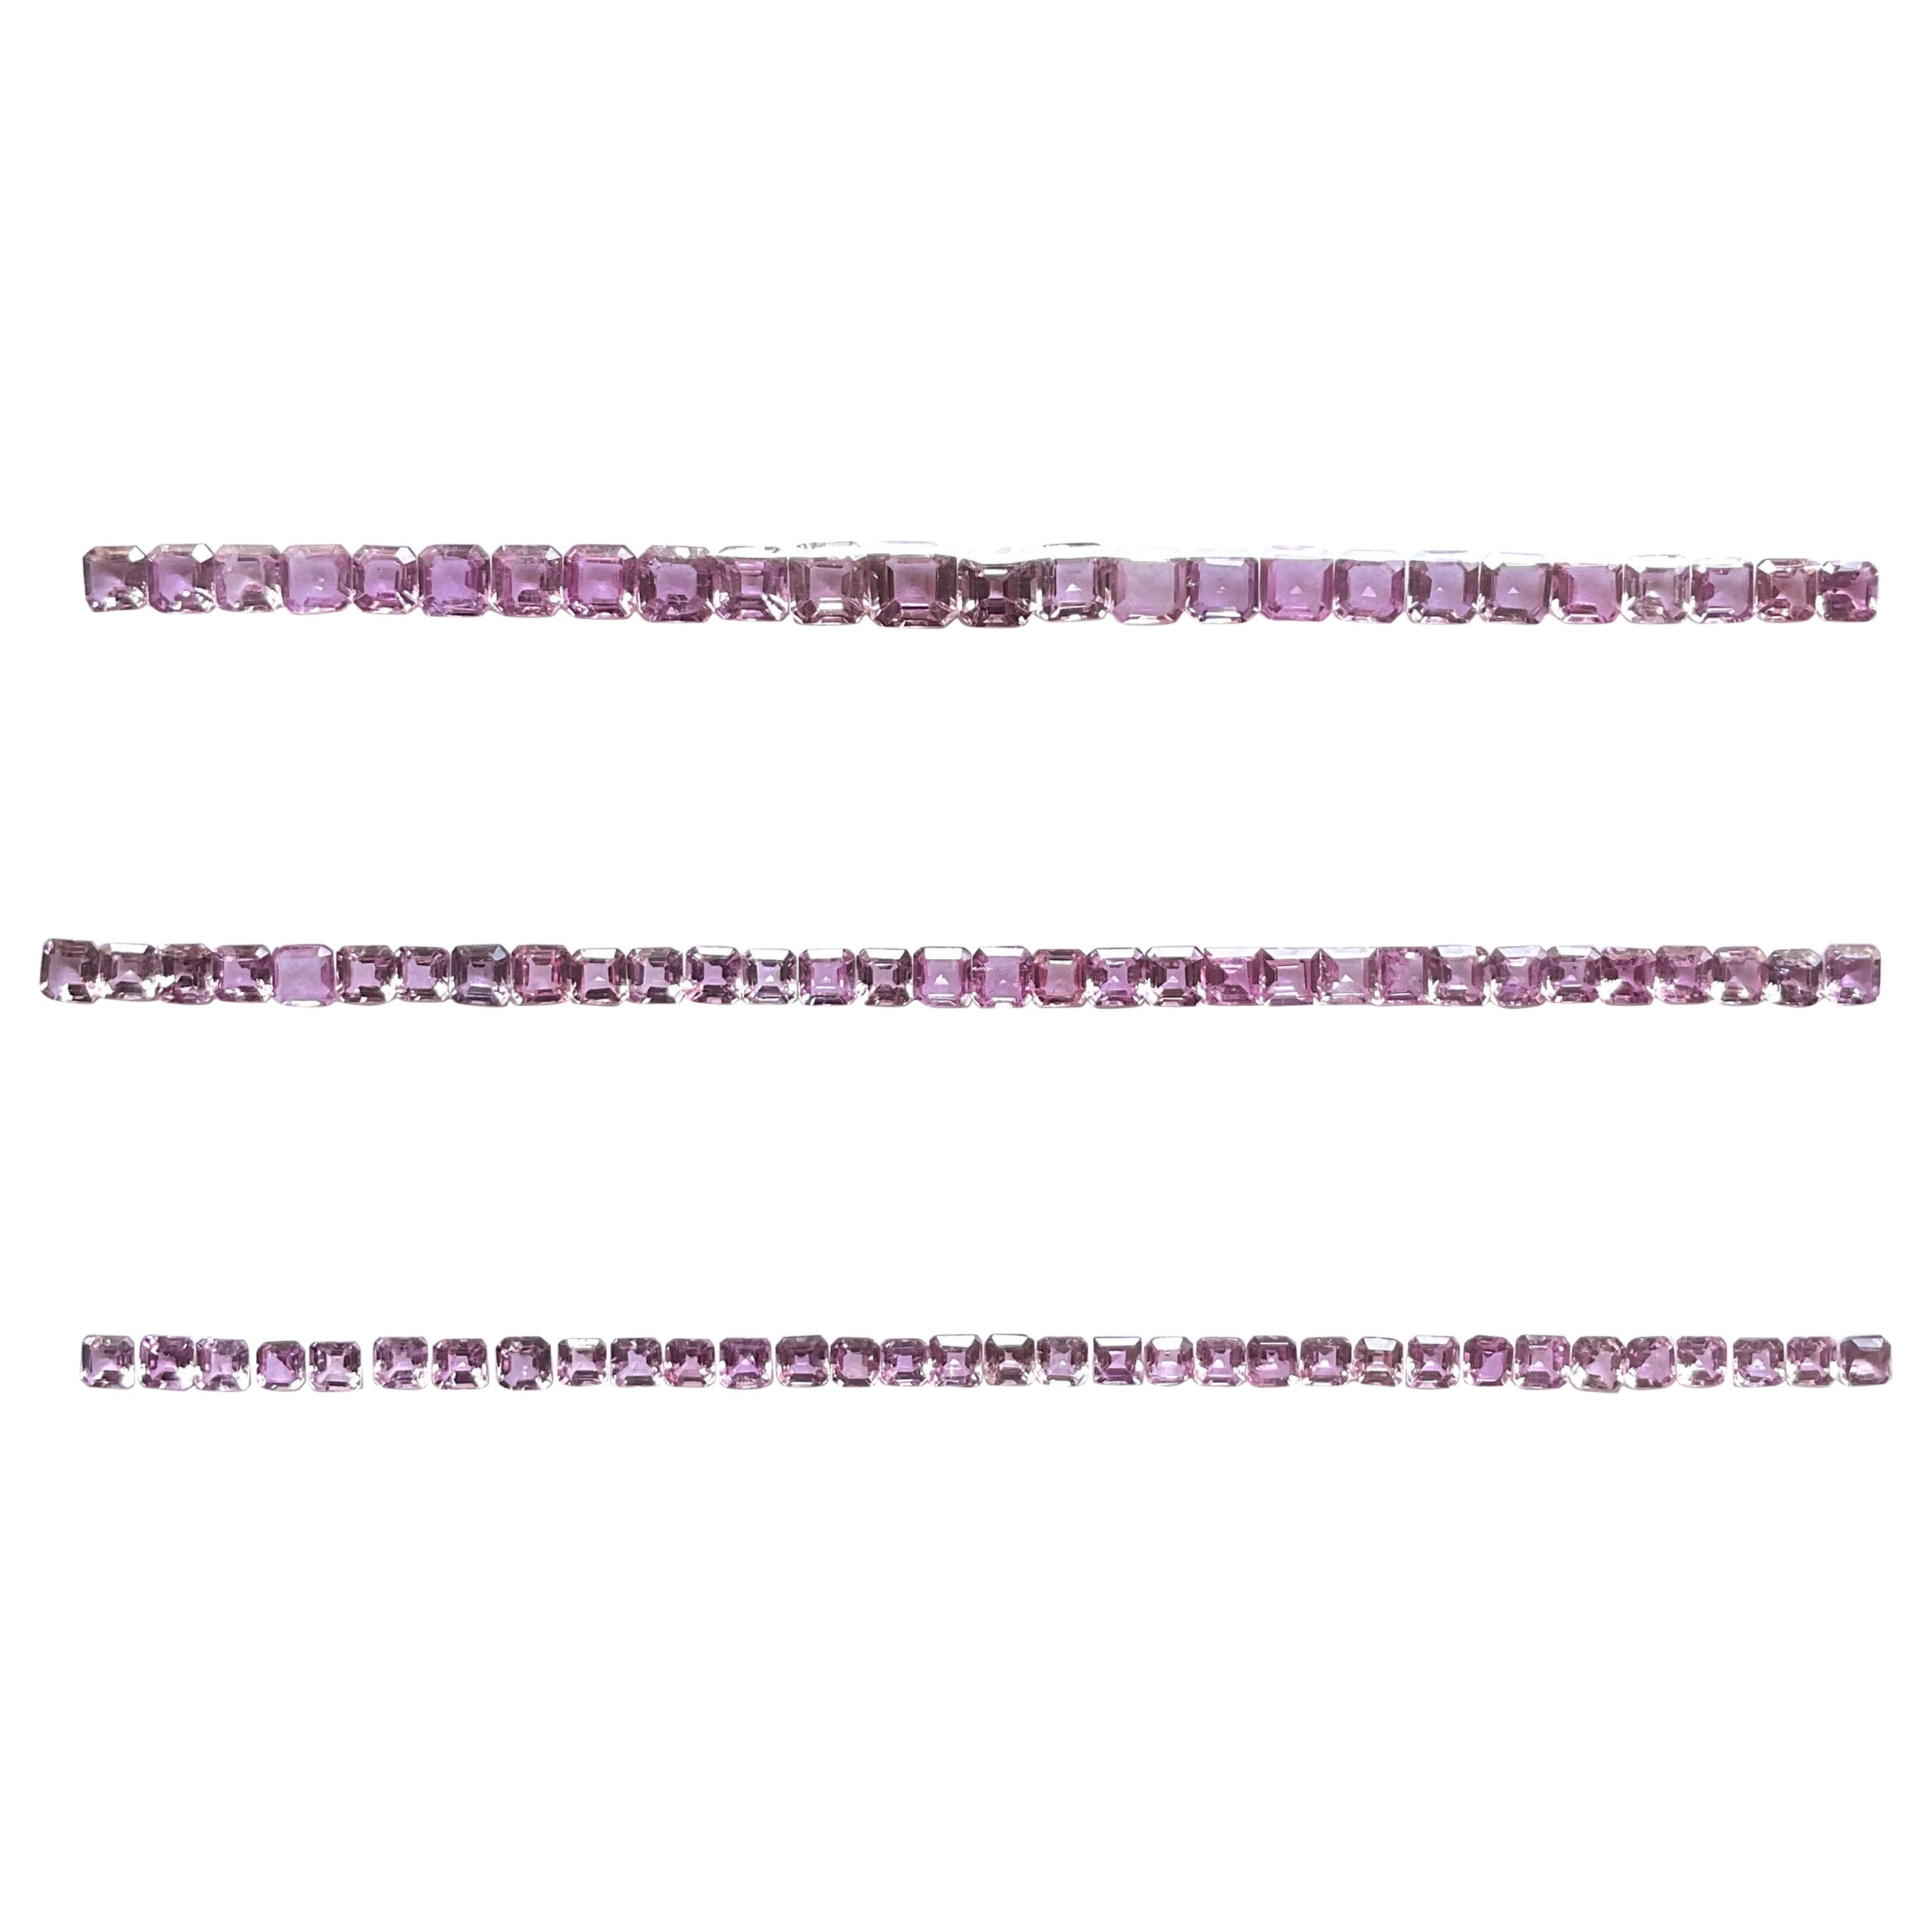 Natural Pink Sapphire Bracelets 3 sets asscher cut stone For Fine Jewelry gems For Sale